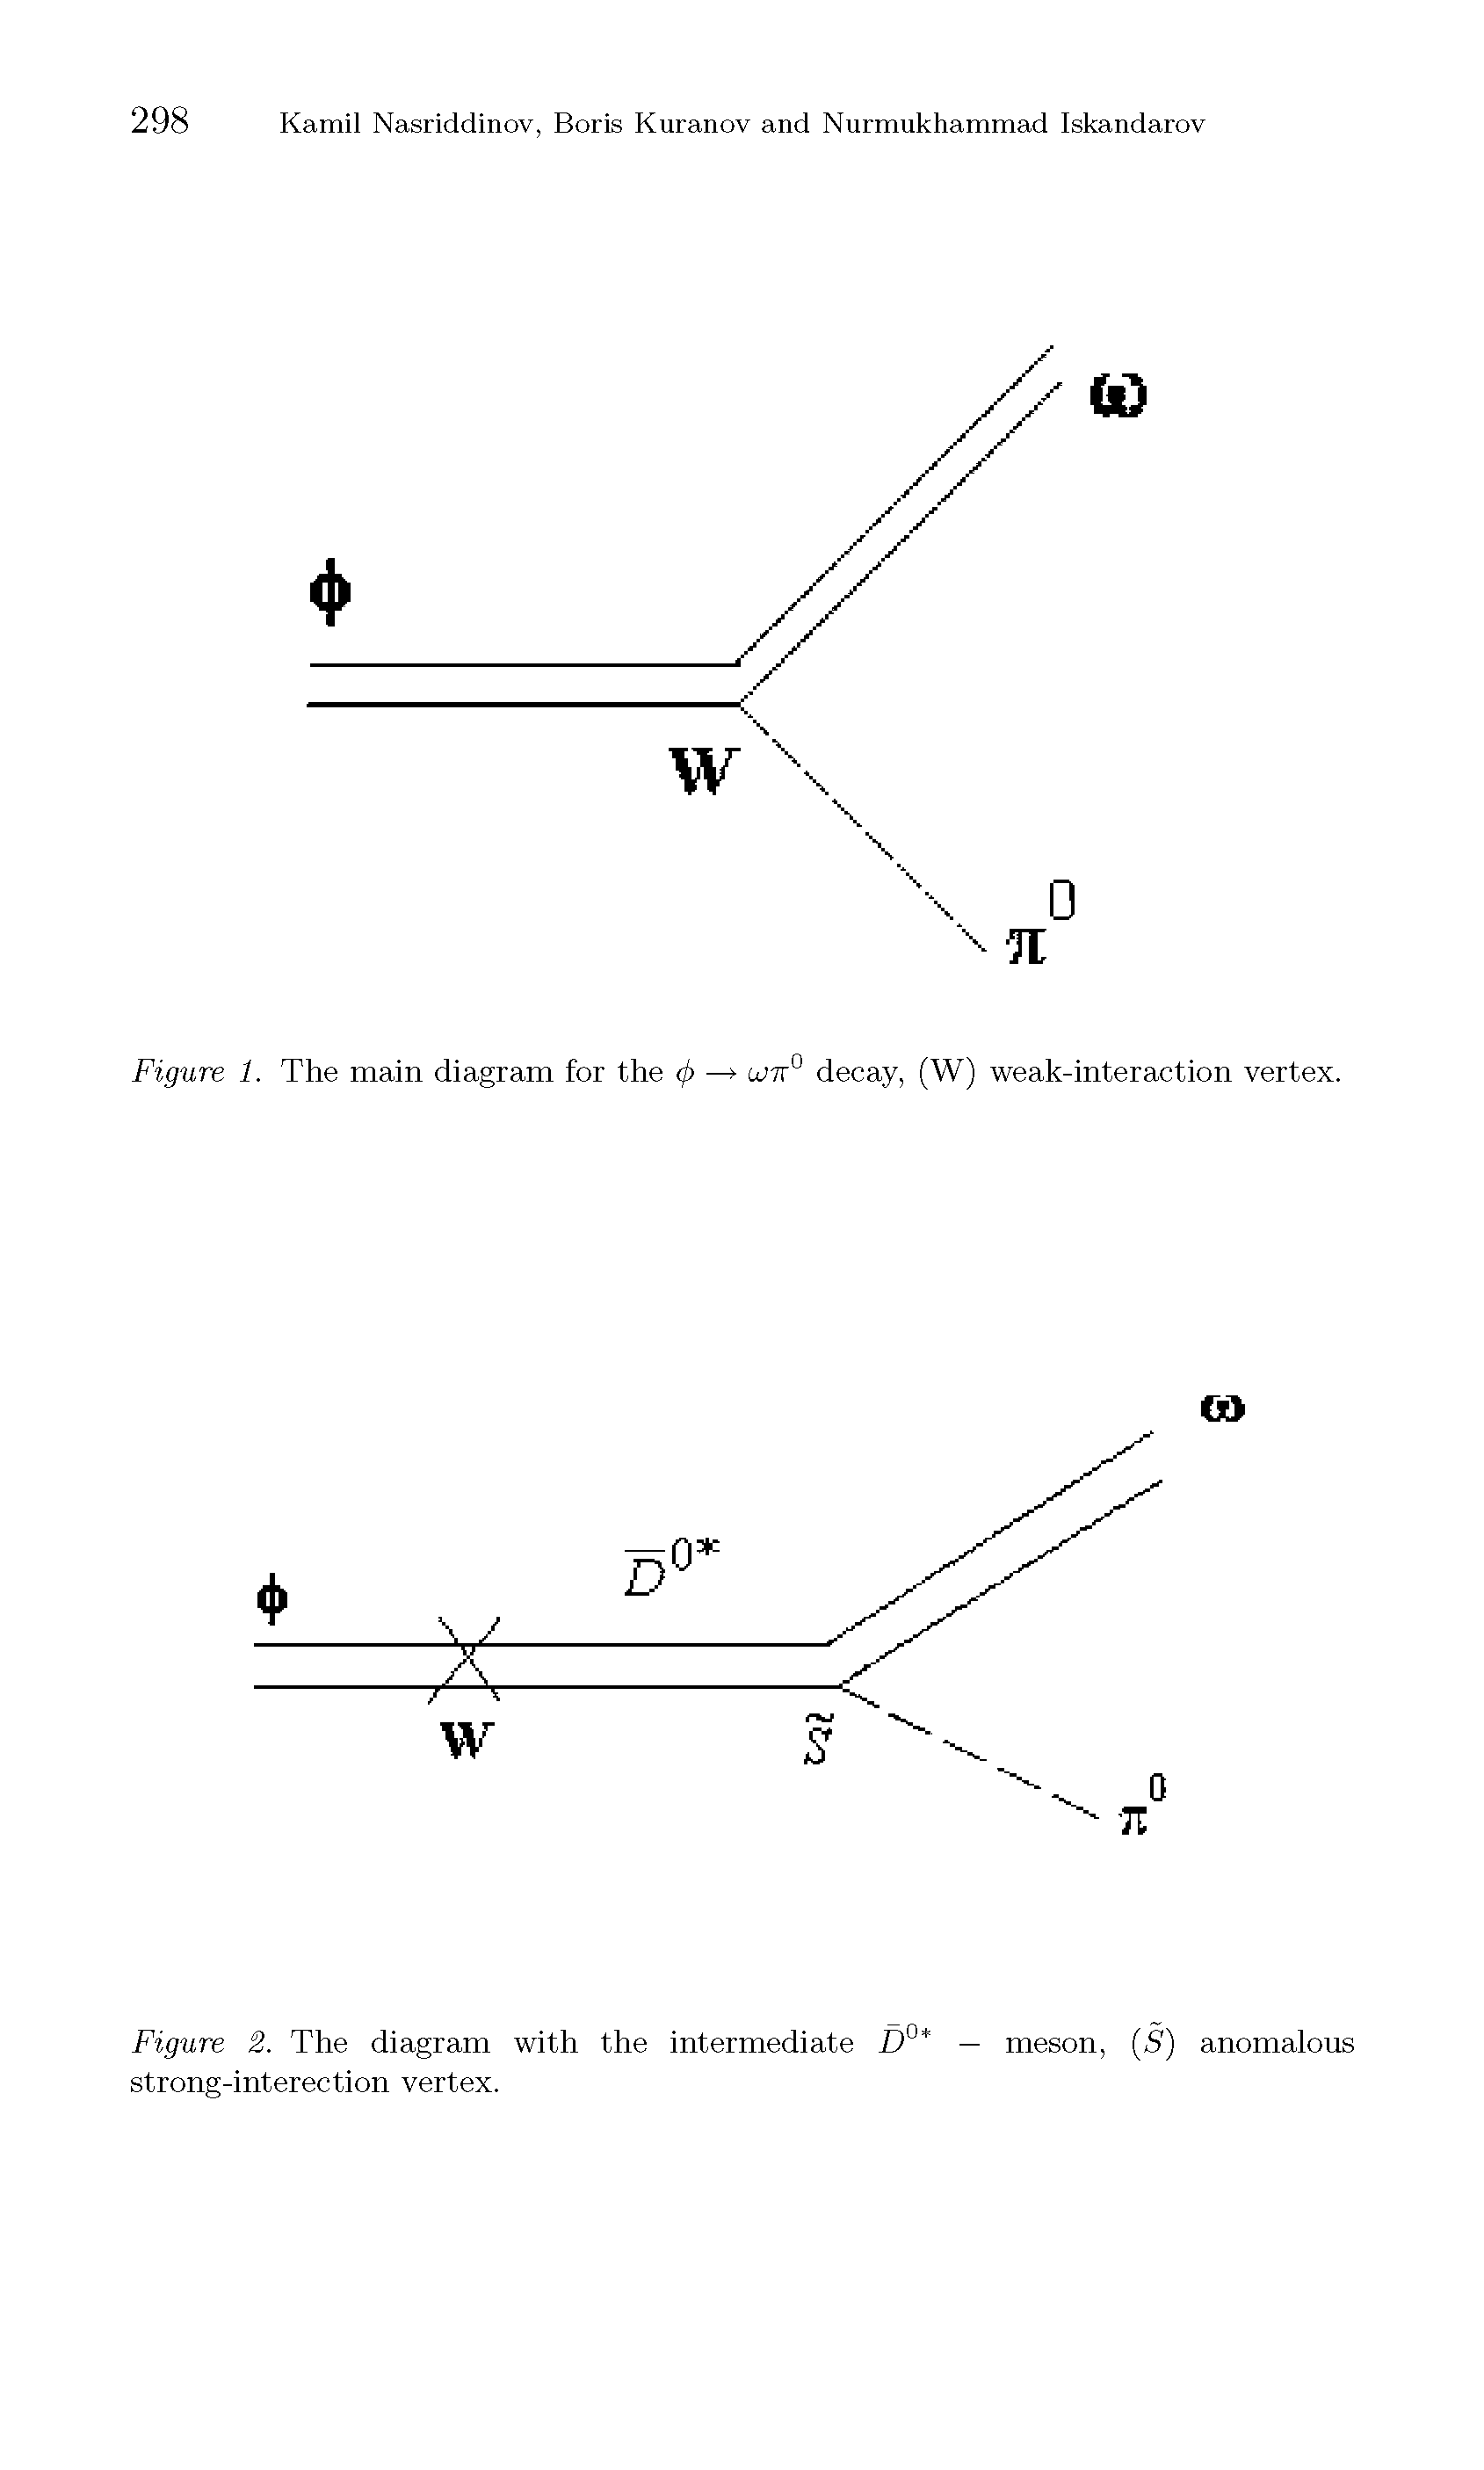 Figure 1. The main diagram for the <f> —> ujir° decay, (W) weak-interaction vertex.